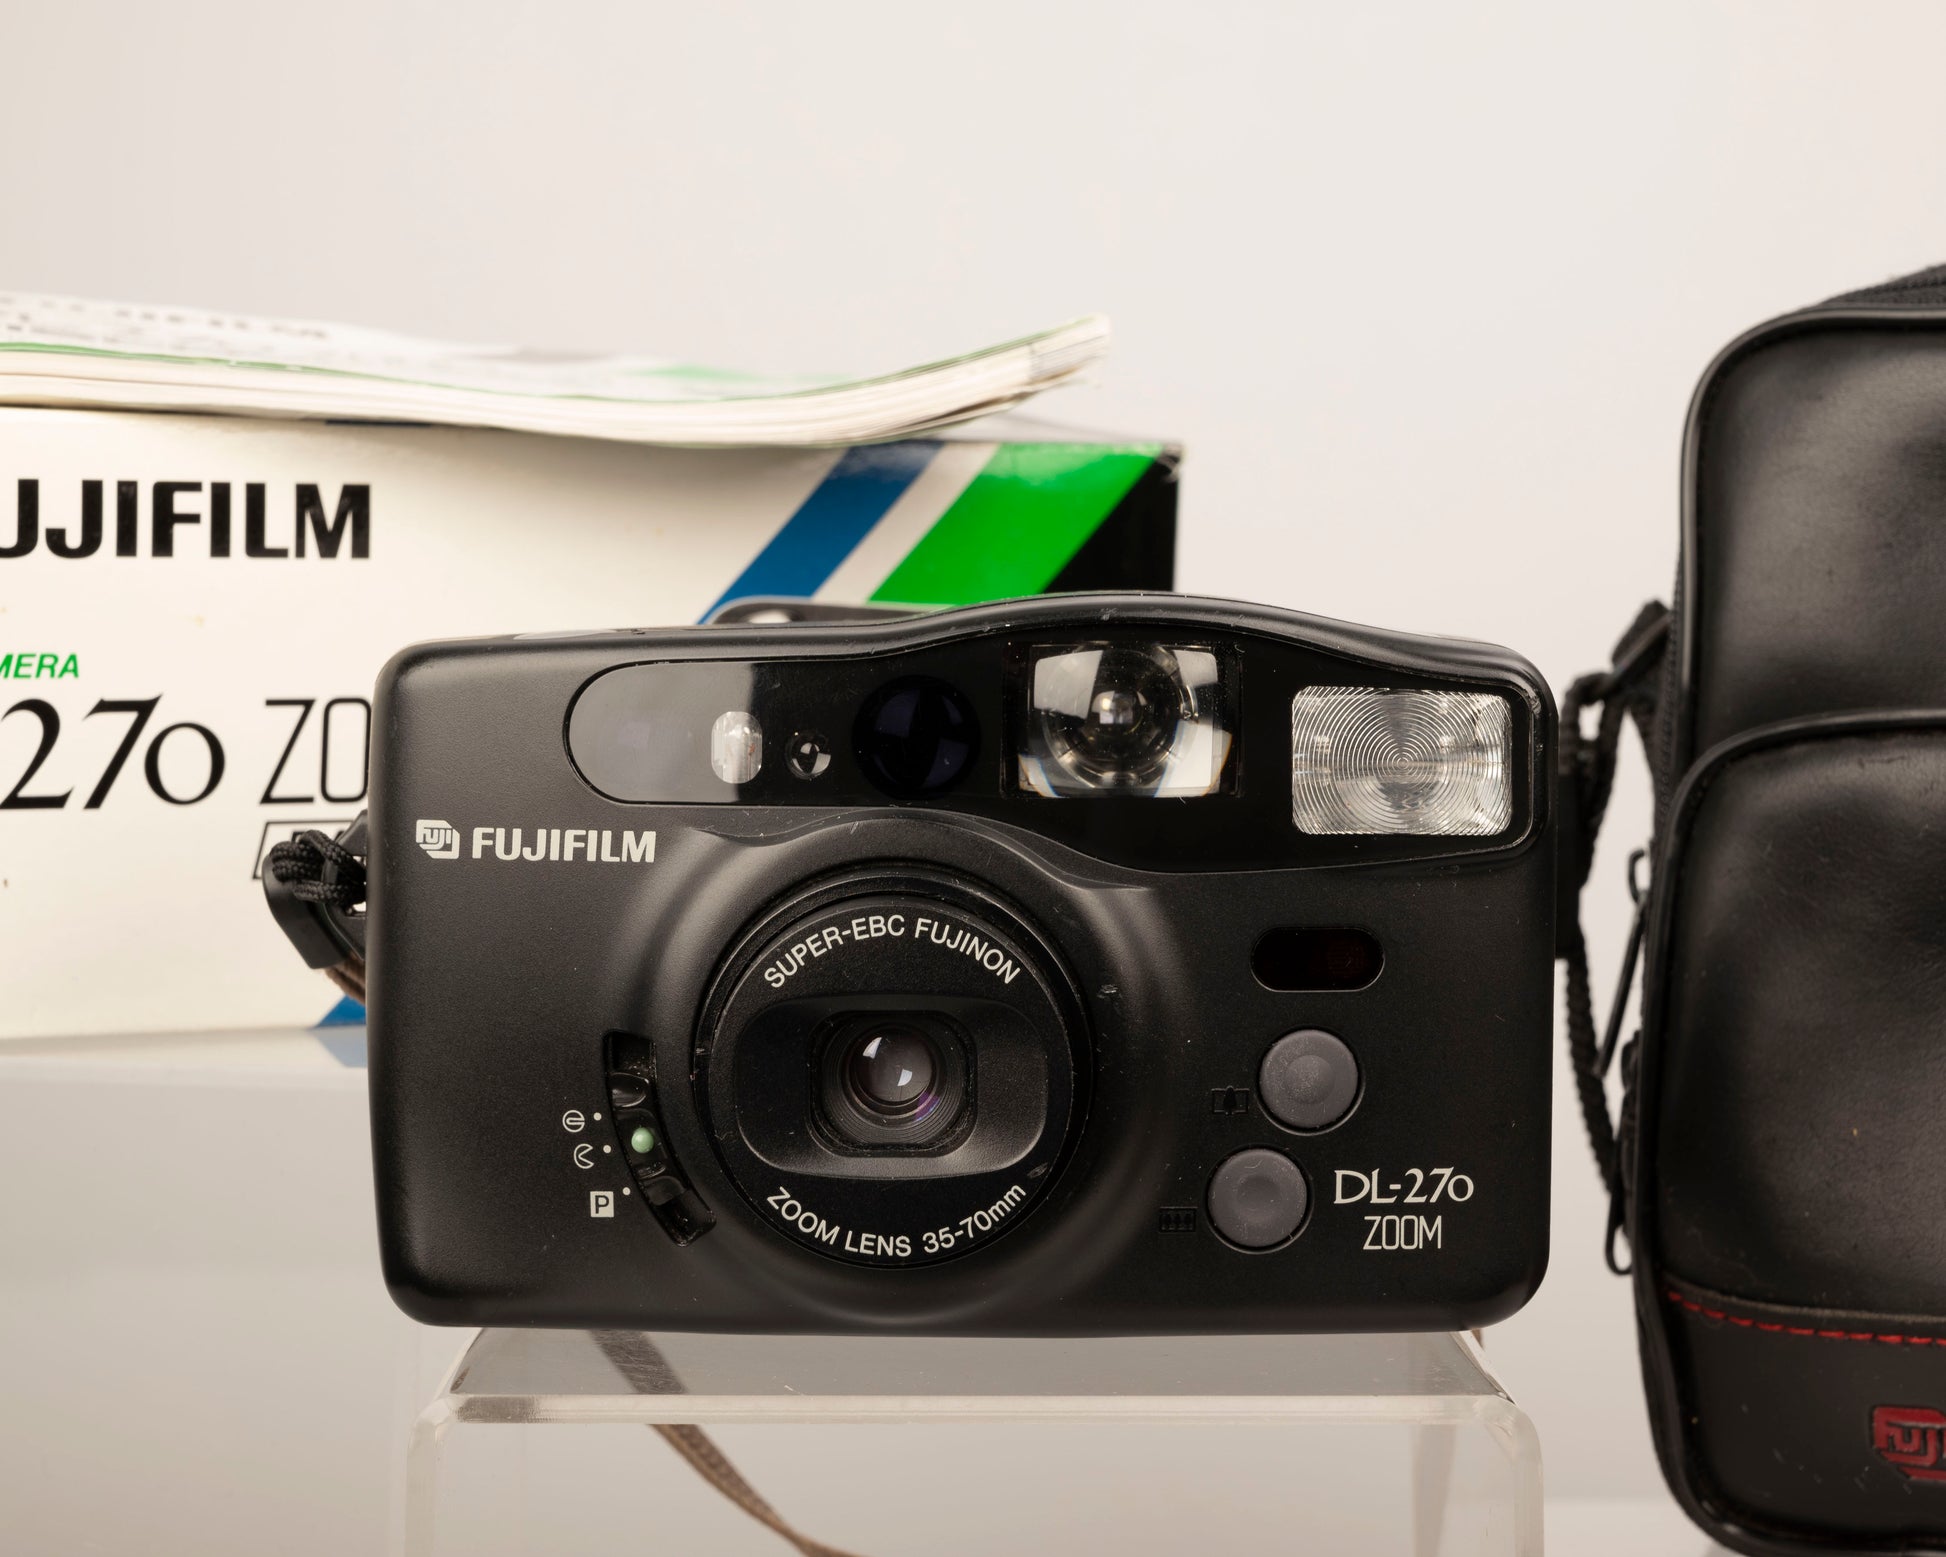 The Fujifilm Dl-270 Zoom (aka Discovery 270) is a quality 35mm point-and-shoot from the late 1990s